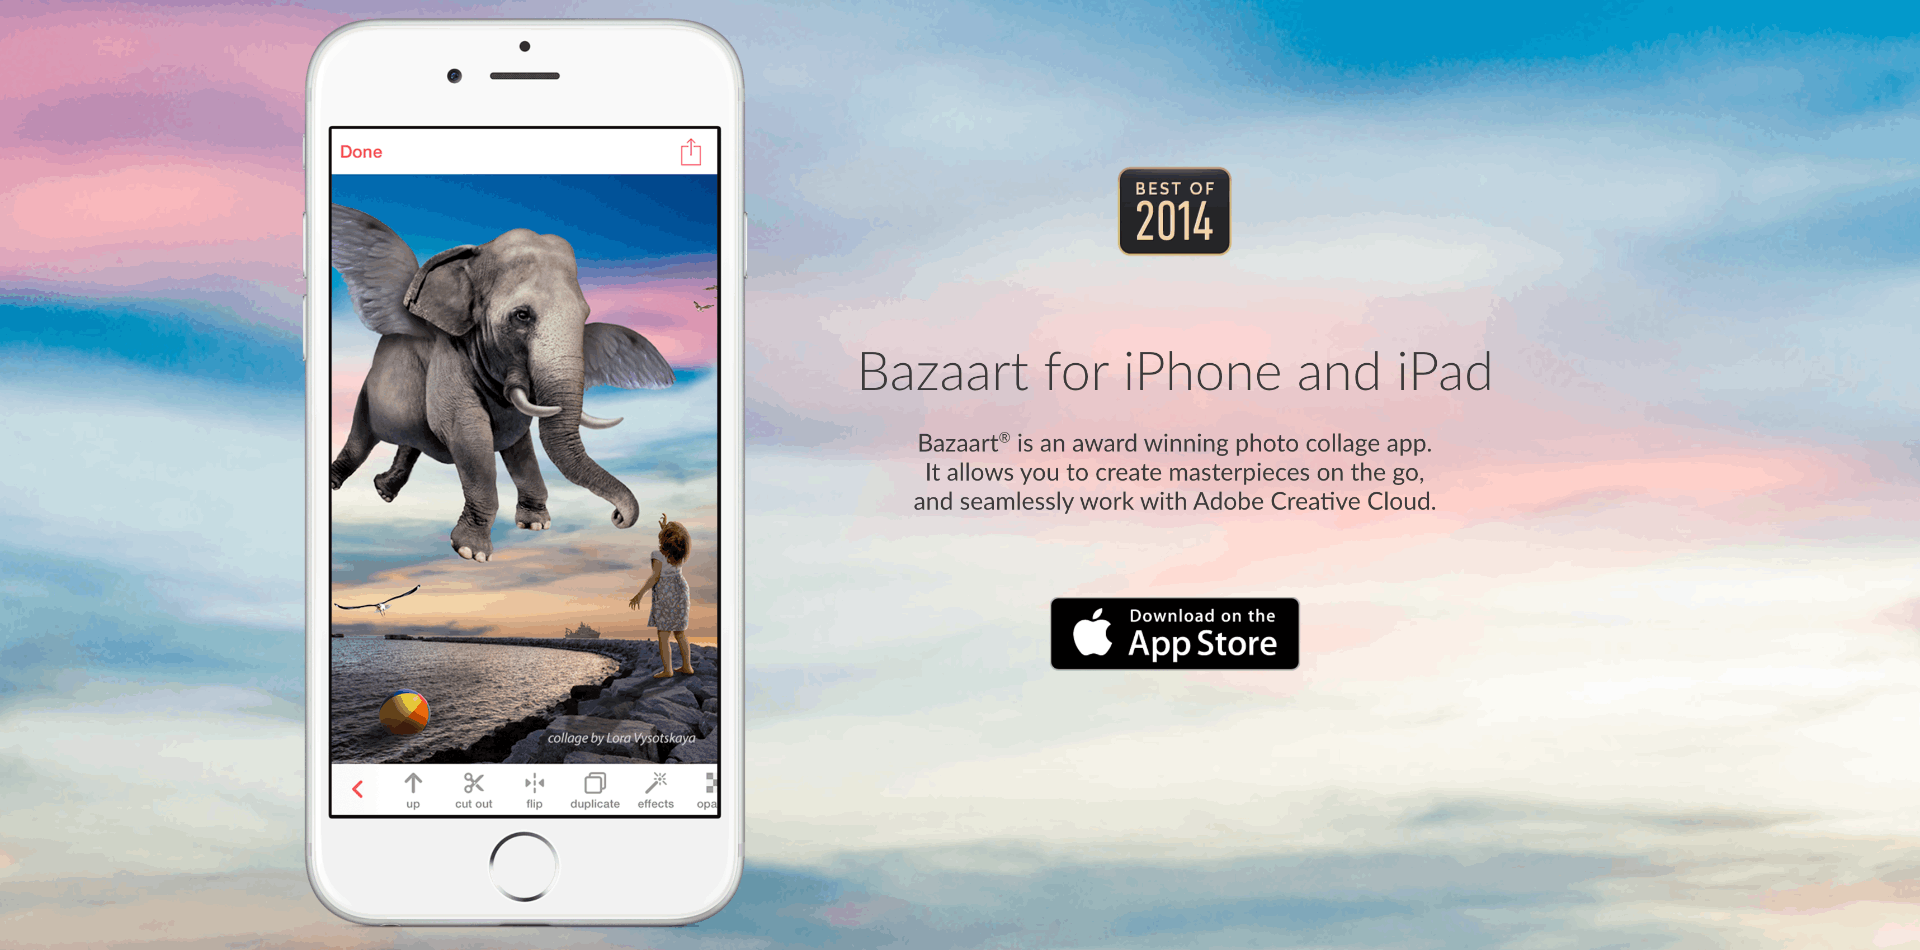 Bazaart - Discover the Award Winning Photo Editing and Graphic Design App and How to Use it